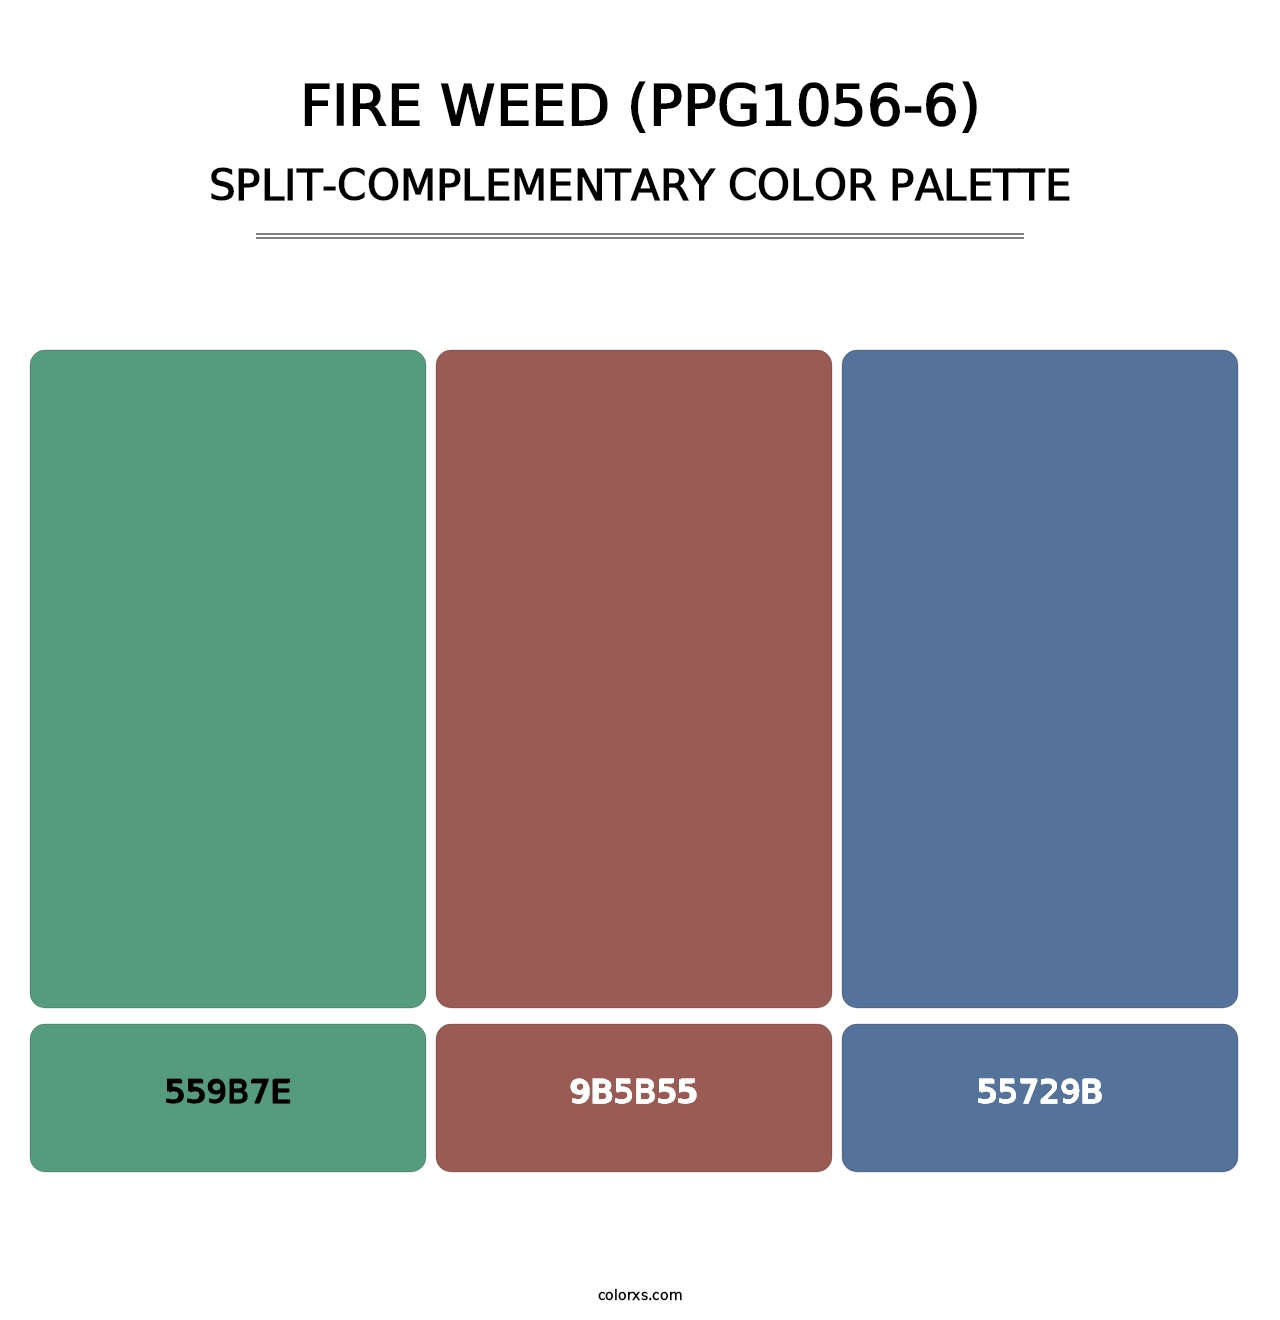 Fire Weed (PPG1056-6) - Split-Complementary Color Palette